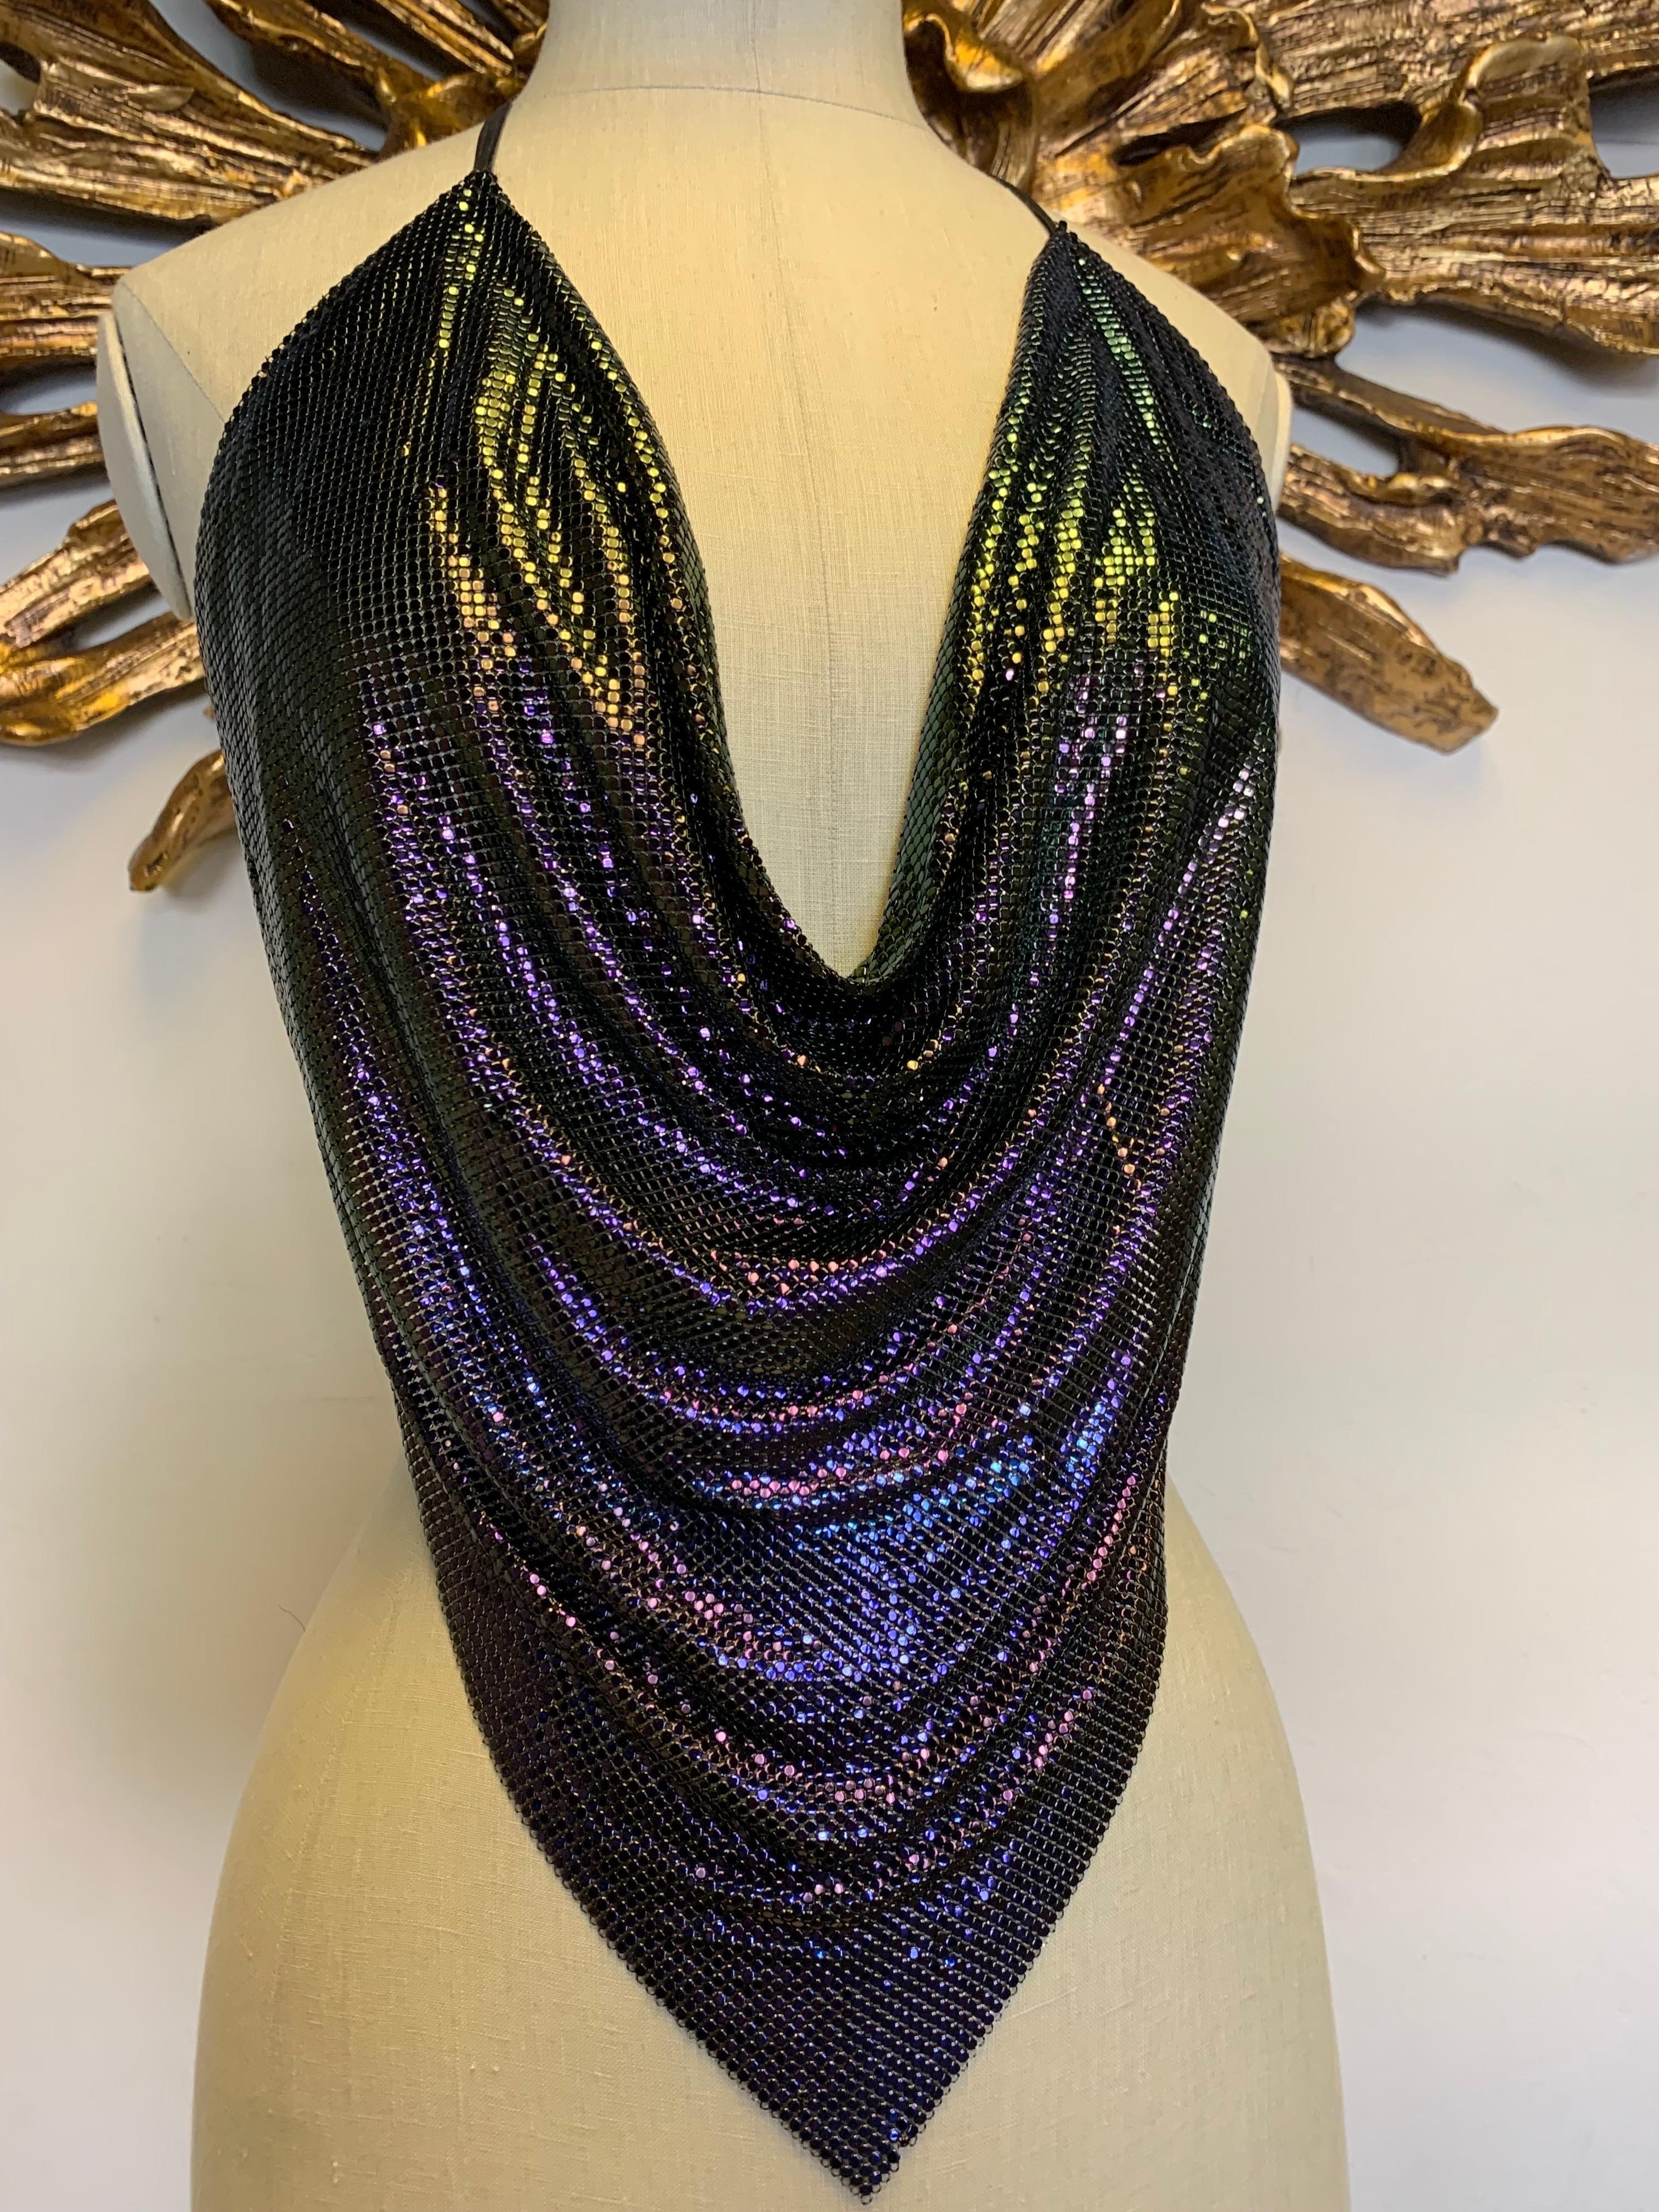 A stunning 1990s Whiting & Davis aubergine to black ombre chainmail halter top: A deeply draped cowl neckline, black mesh base with thin black leather ties at neck and waist. Size small to medium. 